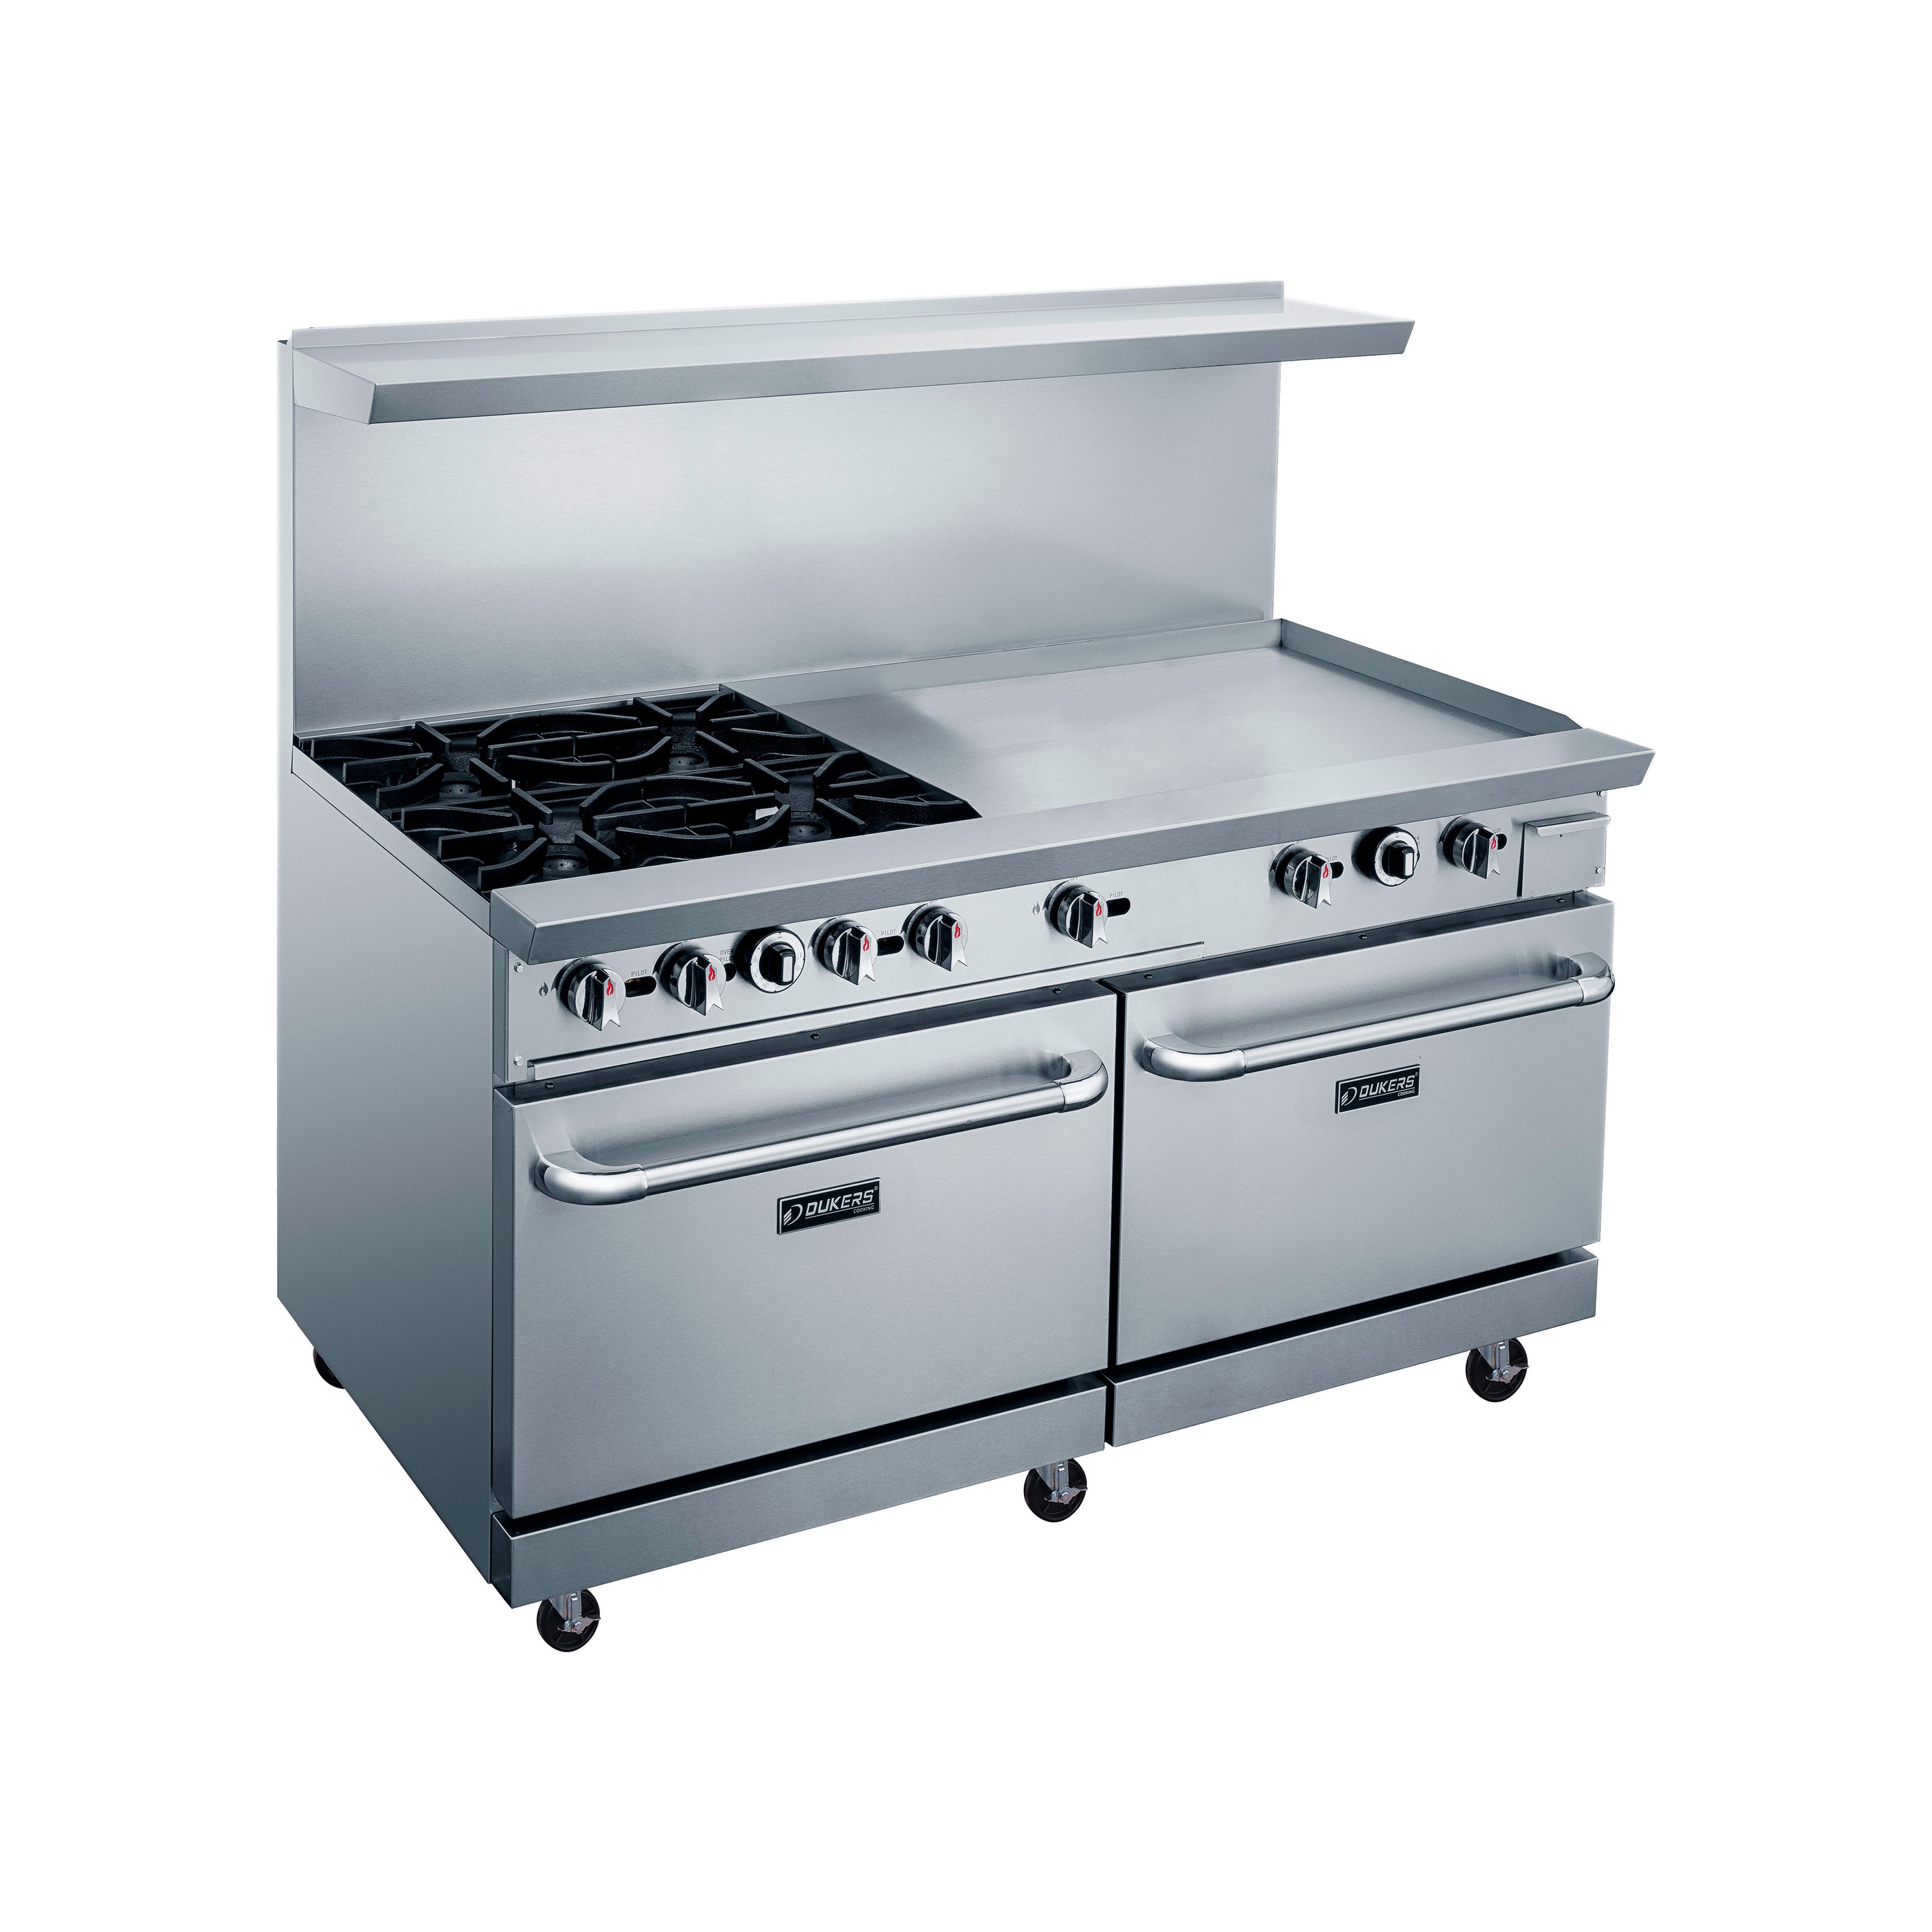 Dukers - DCR60-4B36GM, Commercial 60" Oven Range Four Open Burner with 36" Griddle Natural Gas